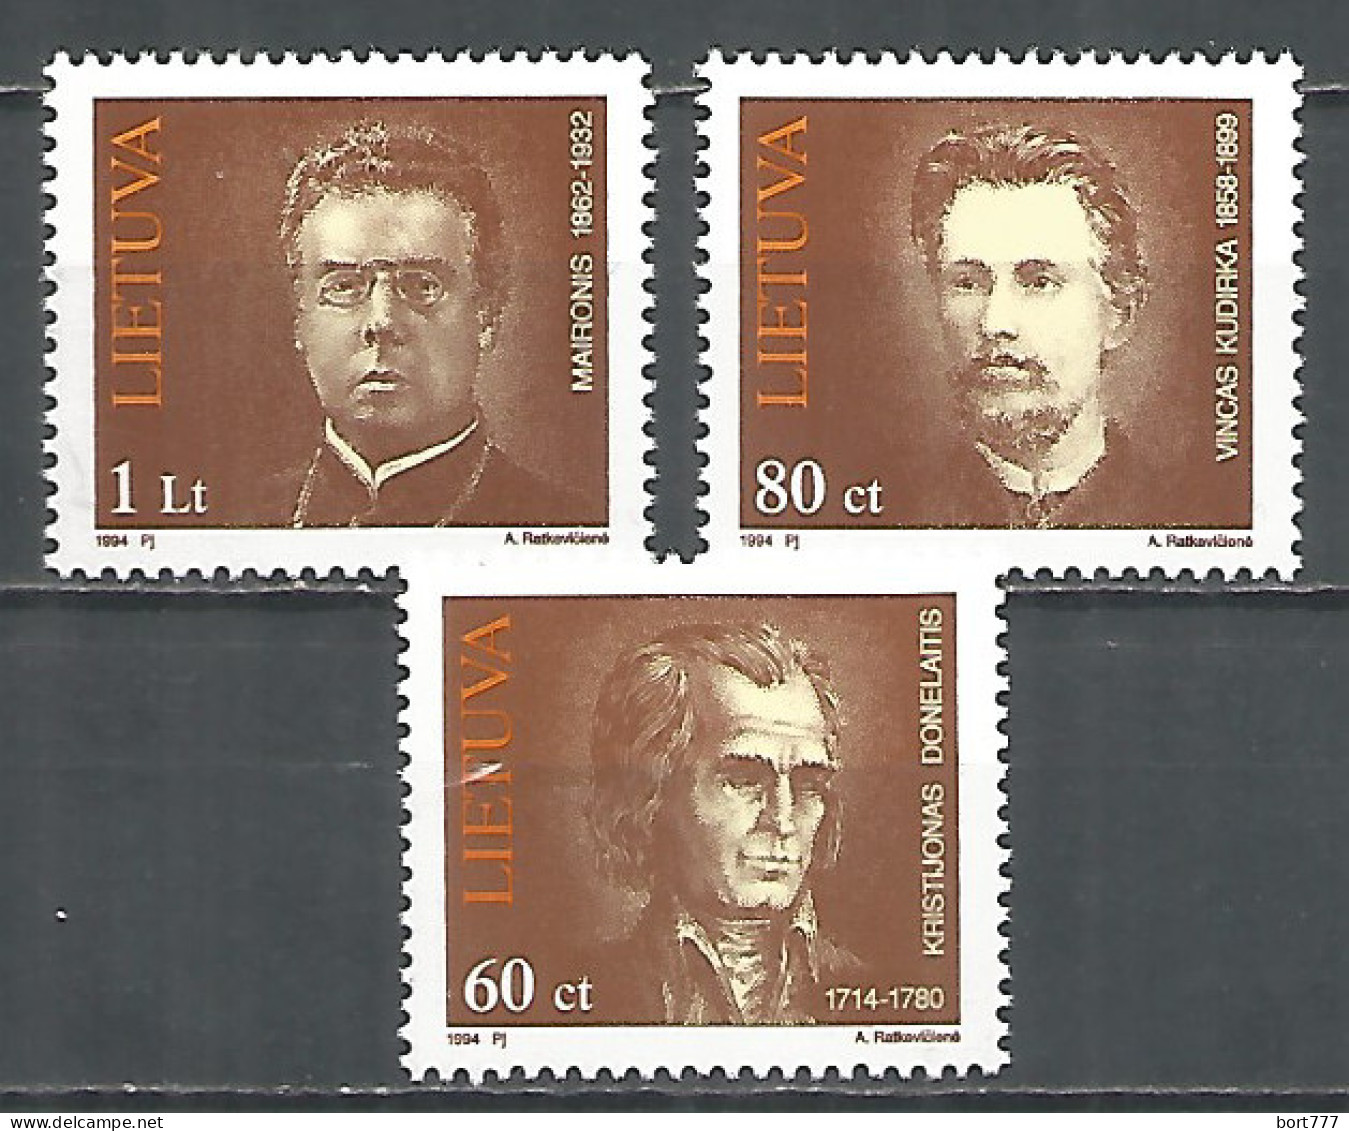 Lithuania 1994 Year Mint Stamps MNH (**) - Lithuania